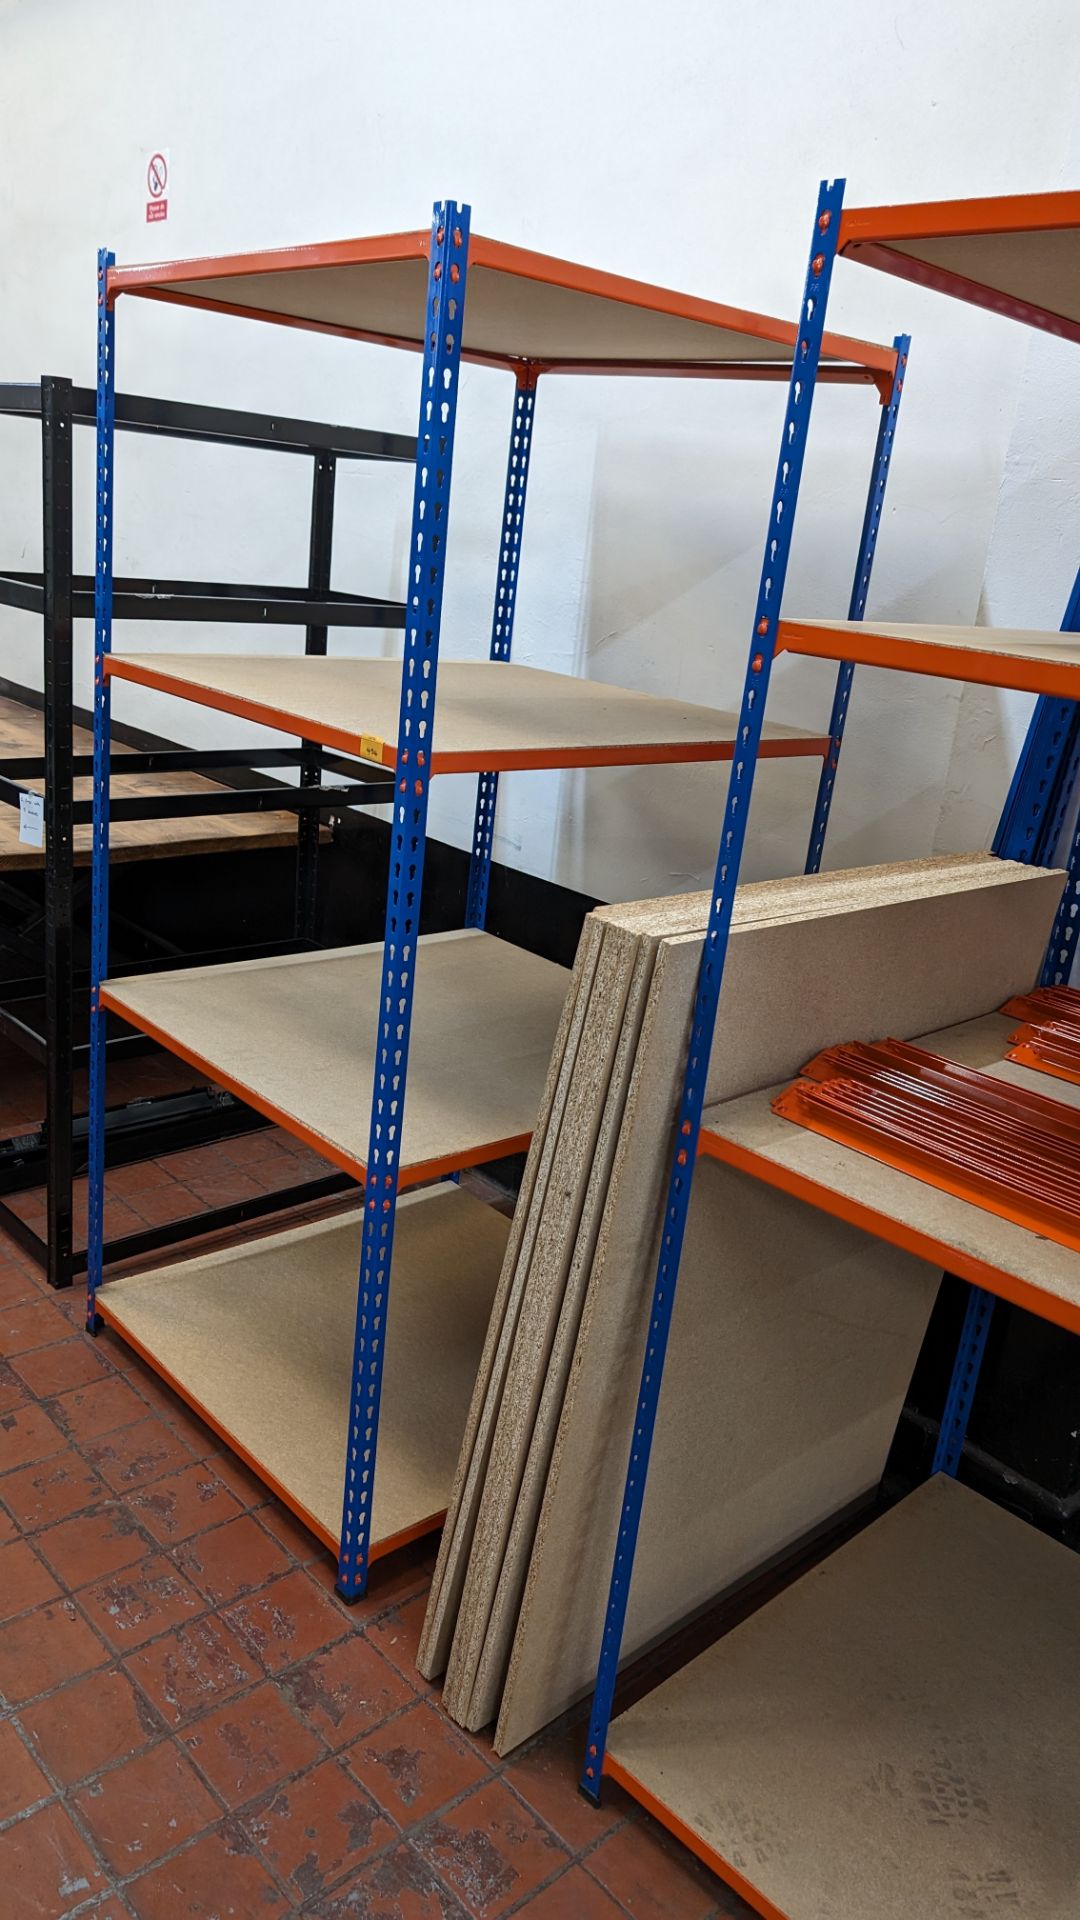 4 off bays of Rapid Racking blue and orange racking, each with four shelves. One bay has a footprin - Bild 3 aus 8